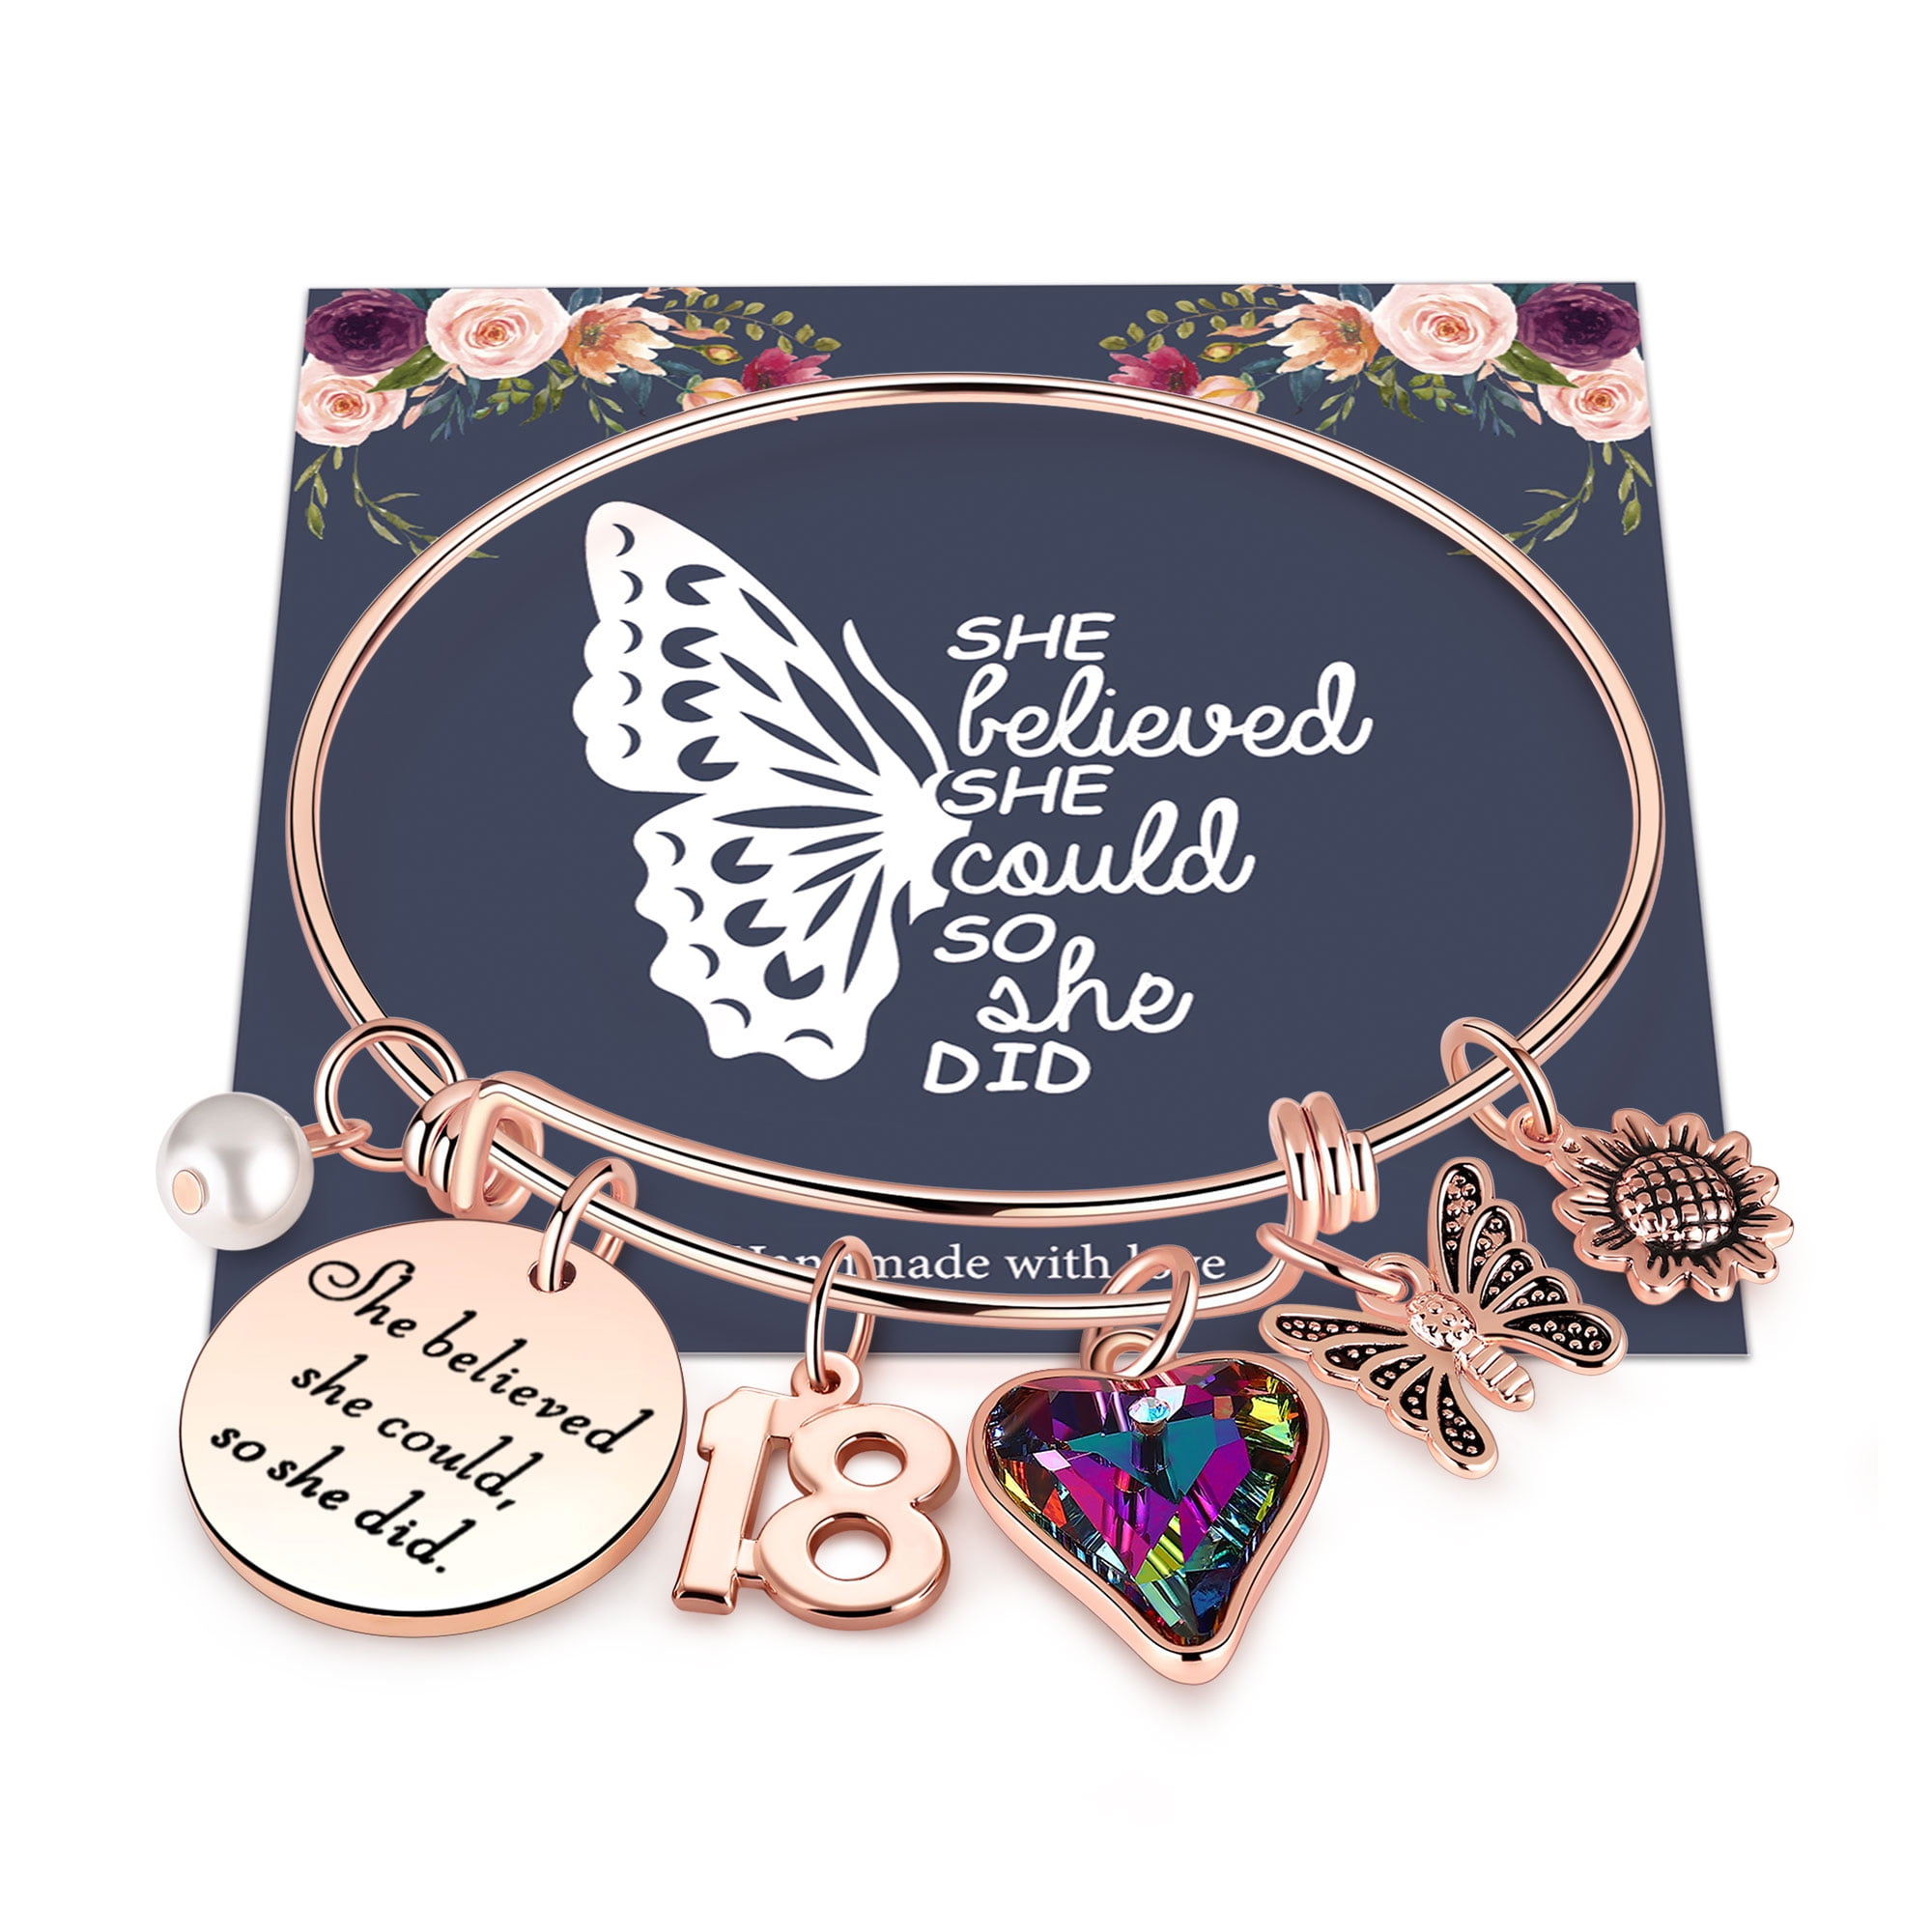 18th Birthday Gifts for Girls 18 Birthday Gifts Charm Bracelet for Teen Girl Granddaughter 18 Year Old Girl Birthday Gift Happy 18th Birthday 36b63aee af84 48fb b91e e5dbee1f407f.319d0bf23a62bcc88355e5bb7878bd7b